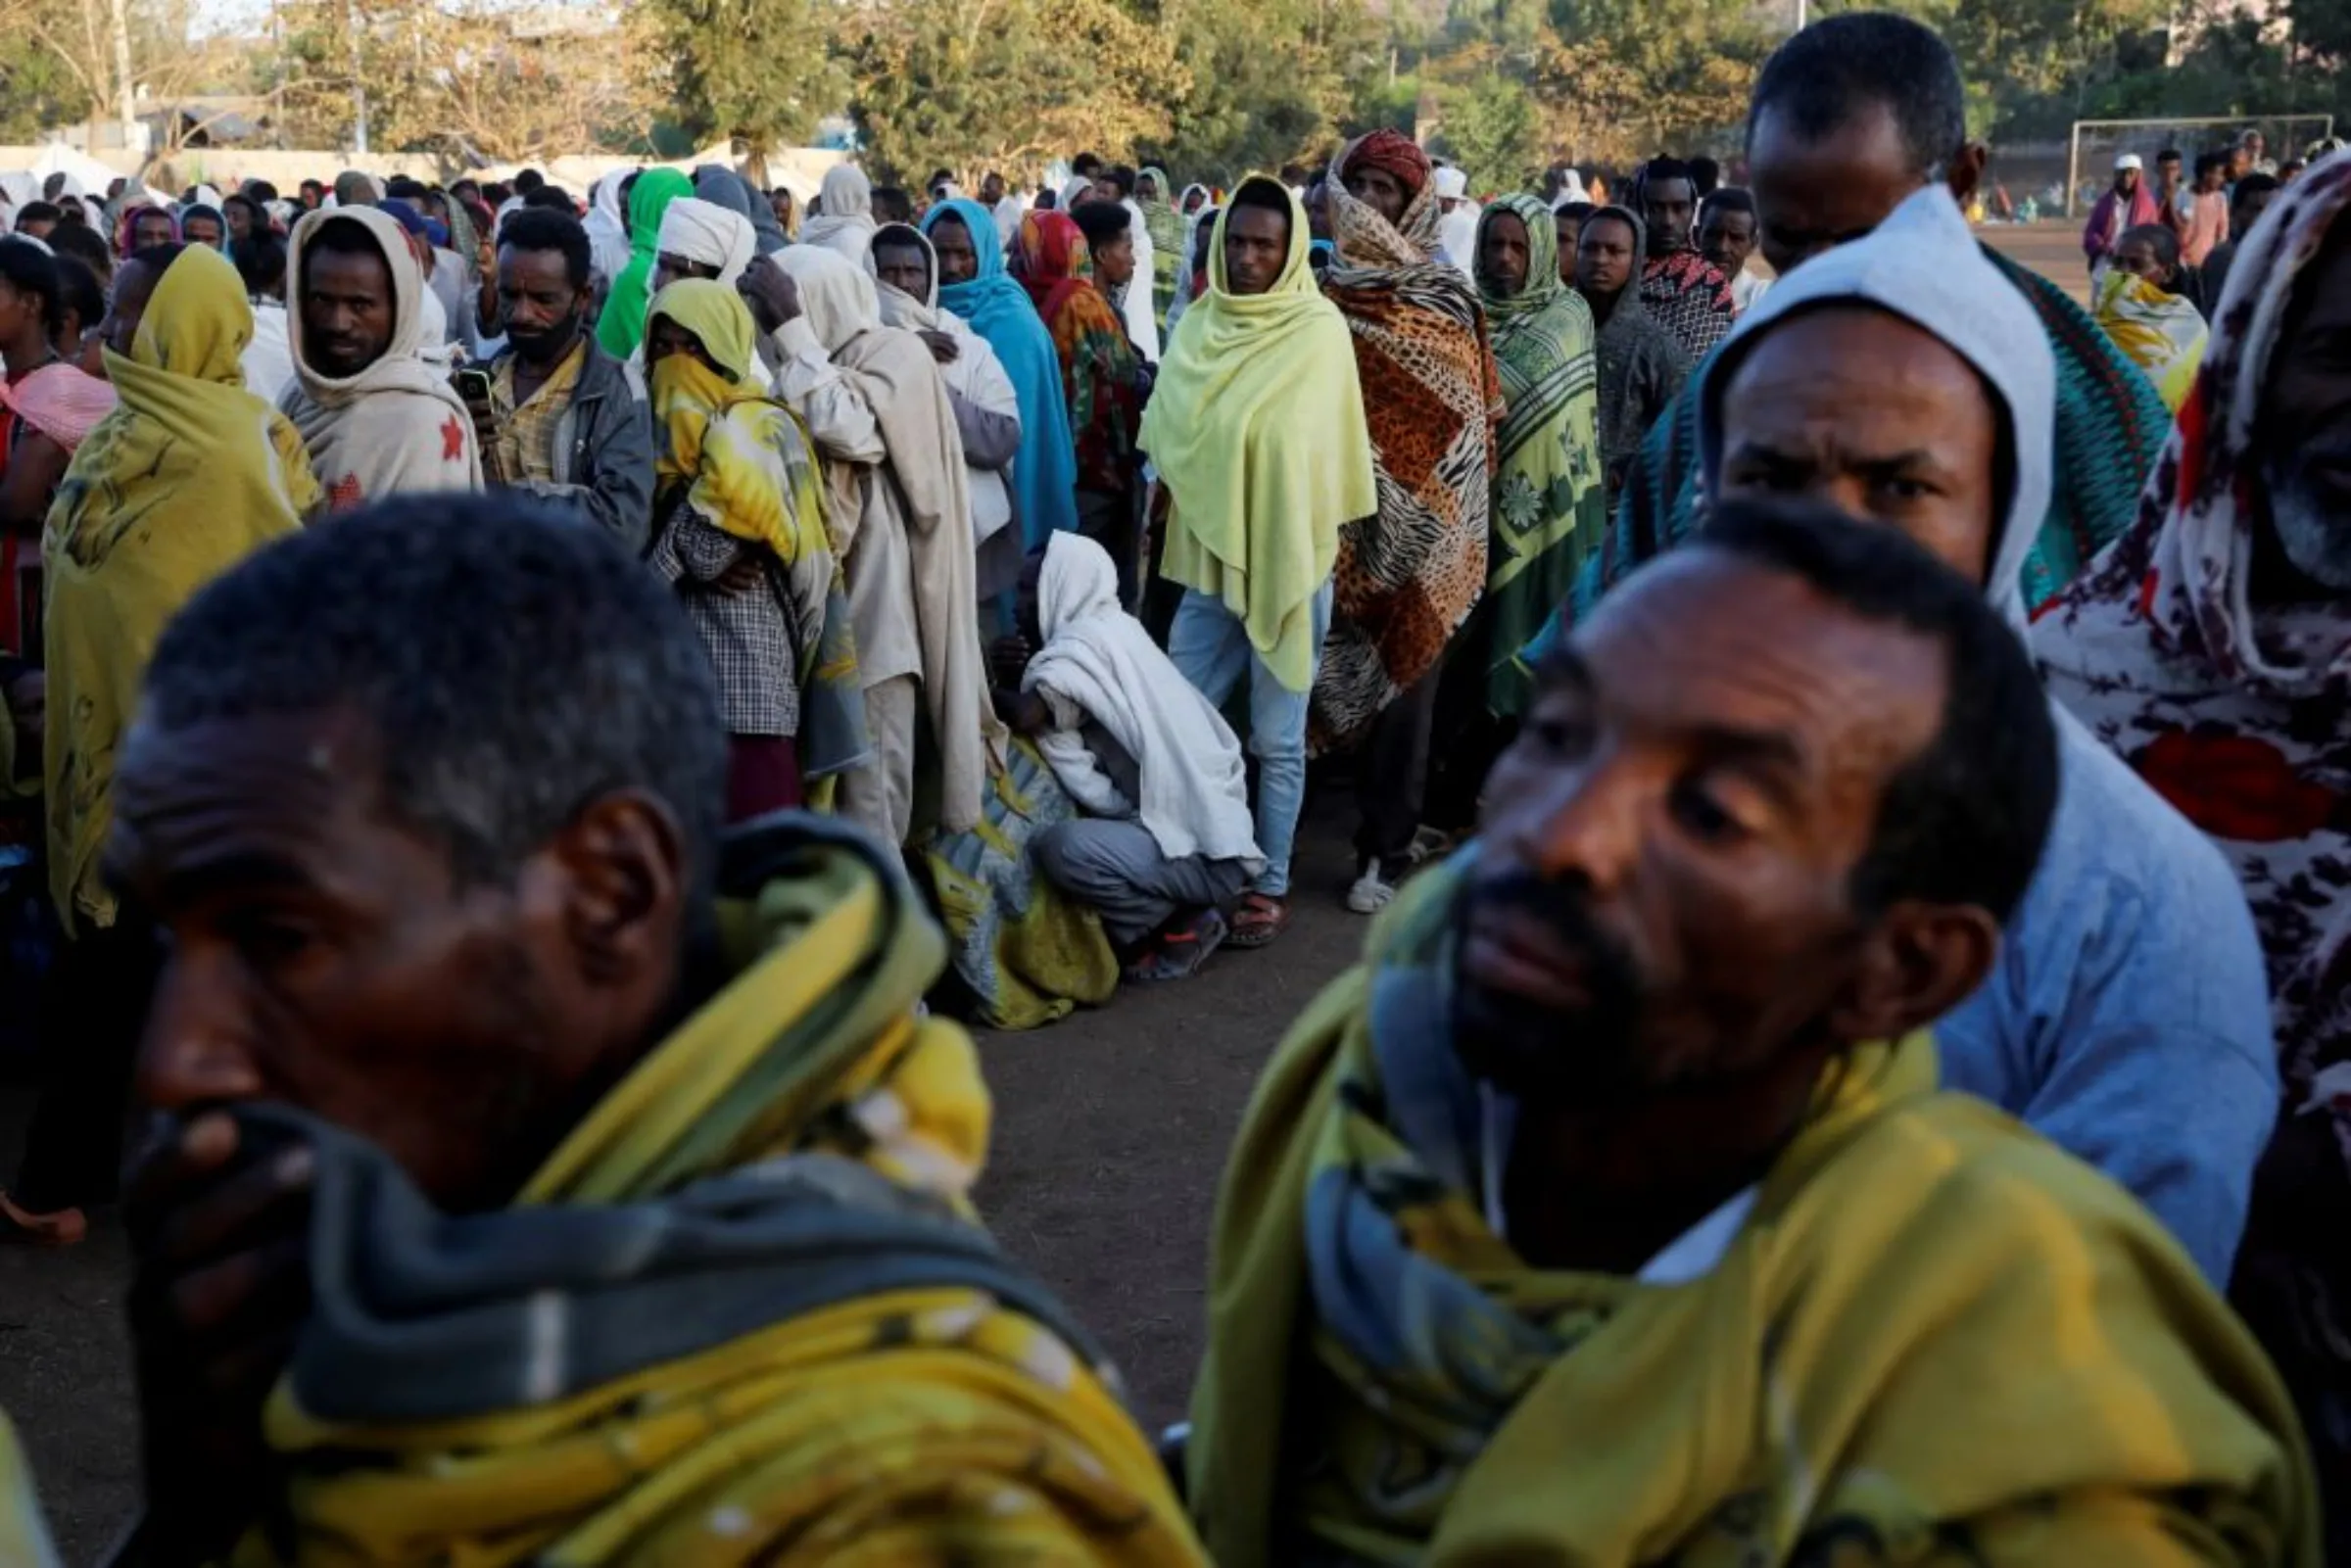 Displaced people queue for food at the Tsehaye primary school, which was turned into a temporary shelter for people displaced by conflict, in the town of Shire, Tigray region, Ethiopia, March 15, 2021